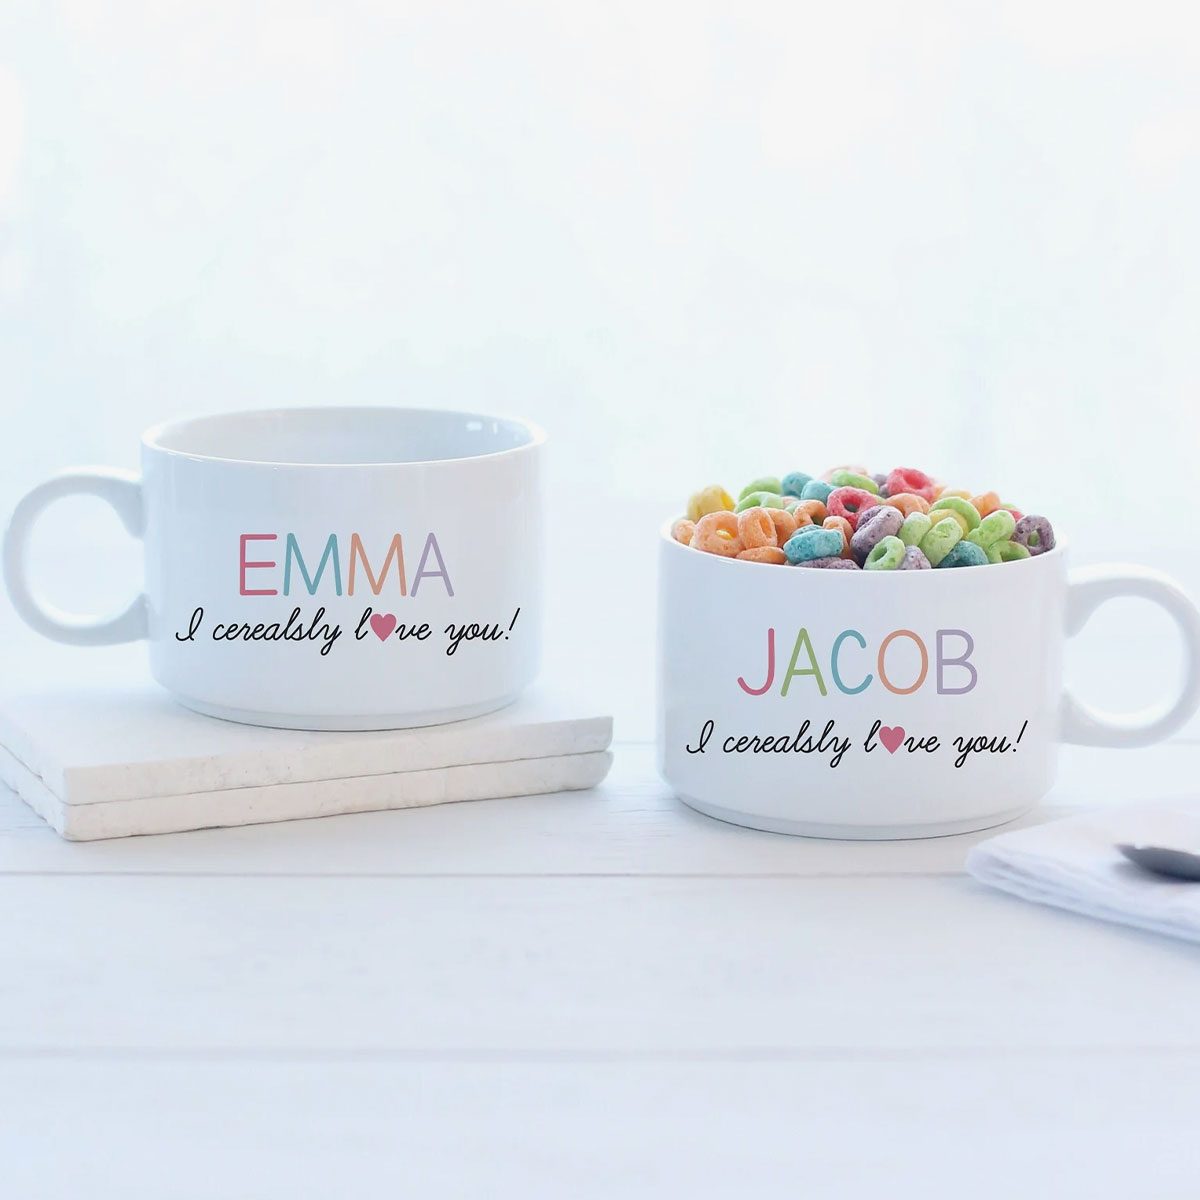 Toh Ecomm Cereal Mug Personalized Ourcalihome Etsy.com